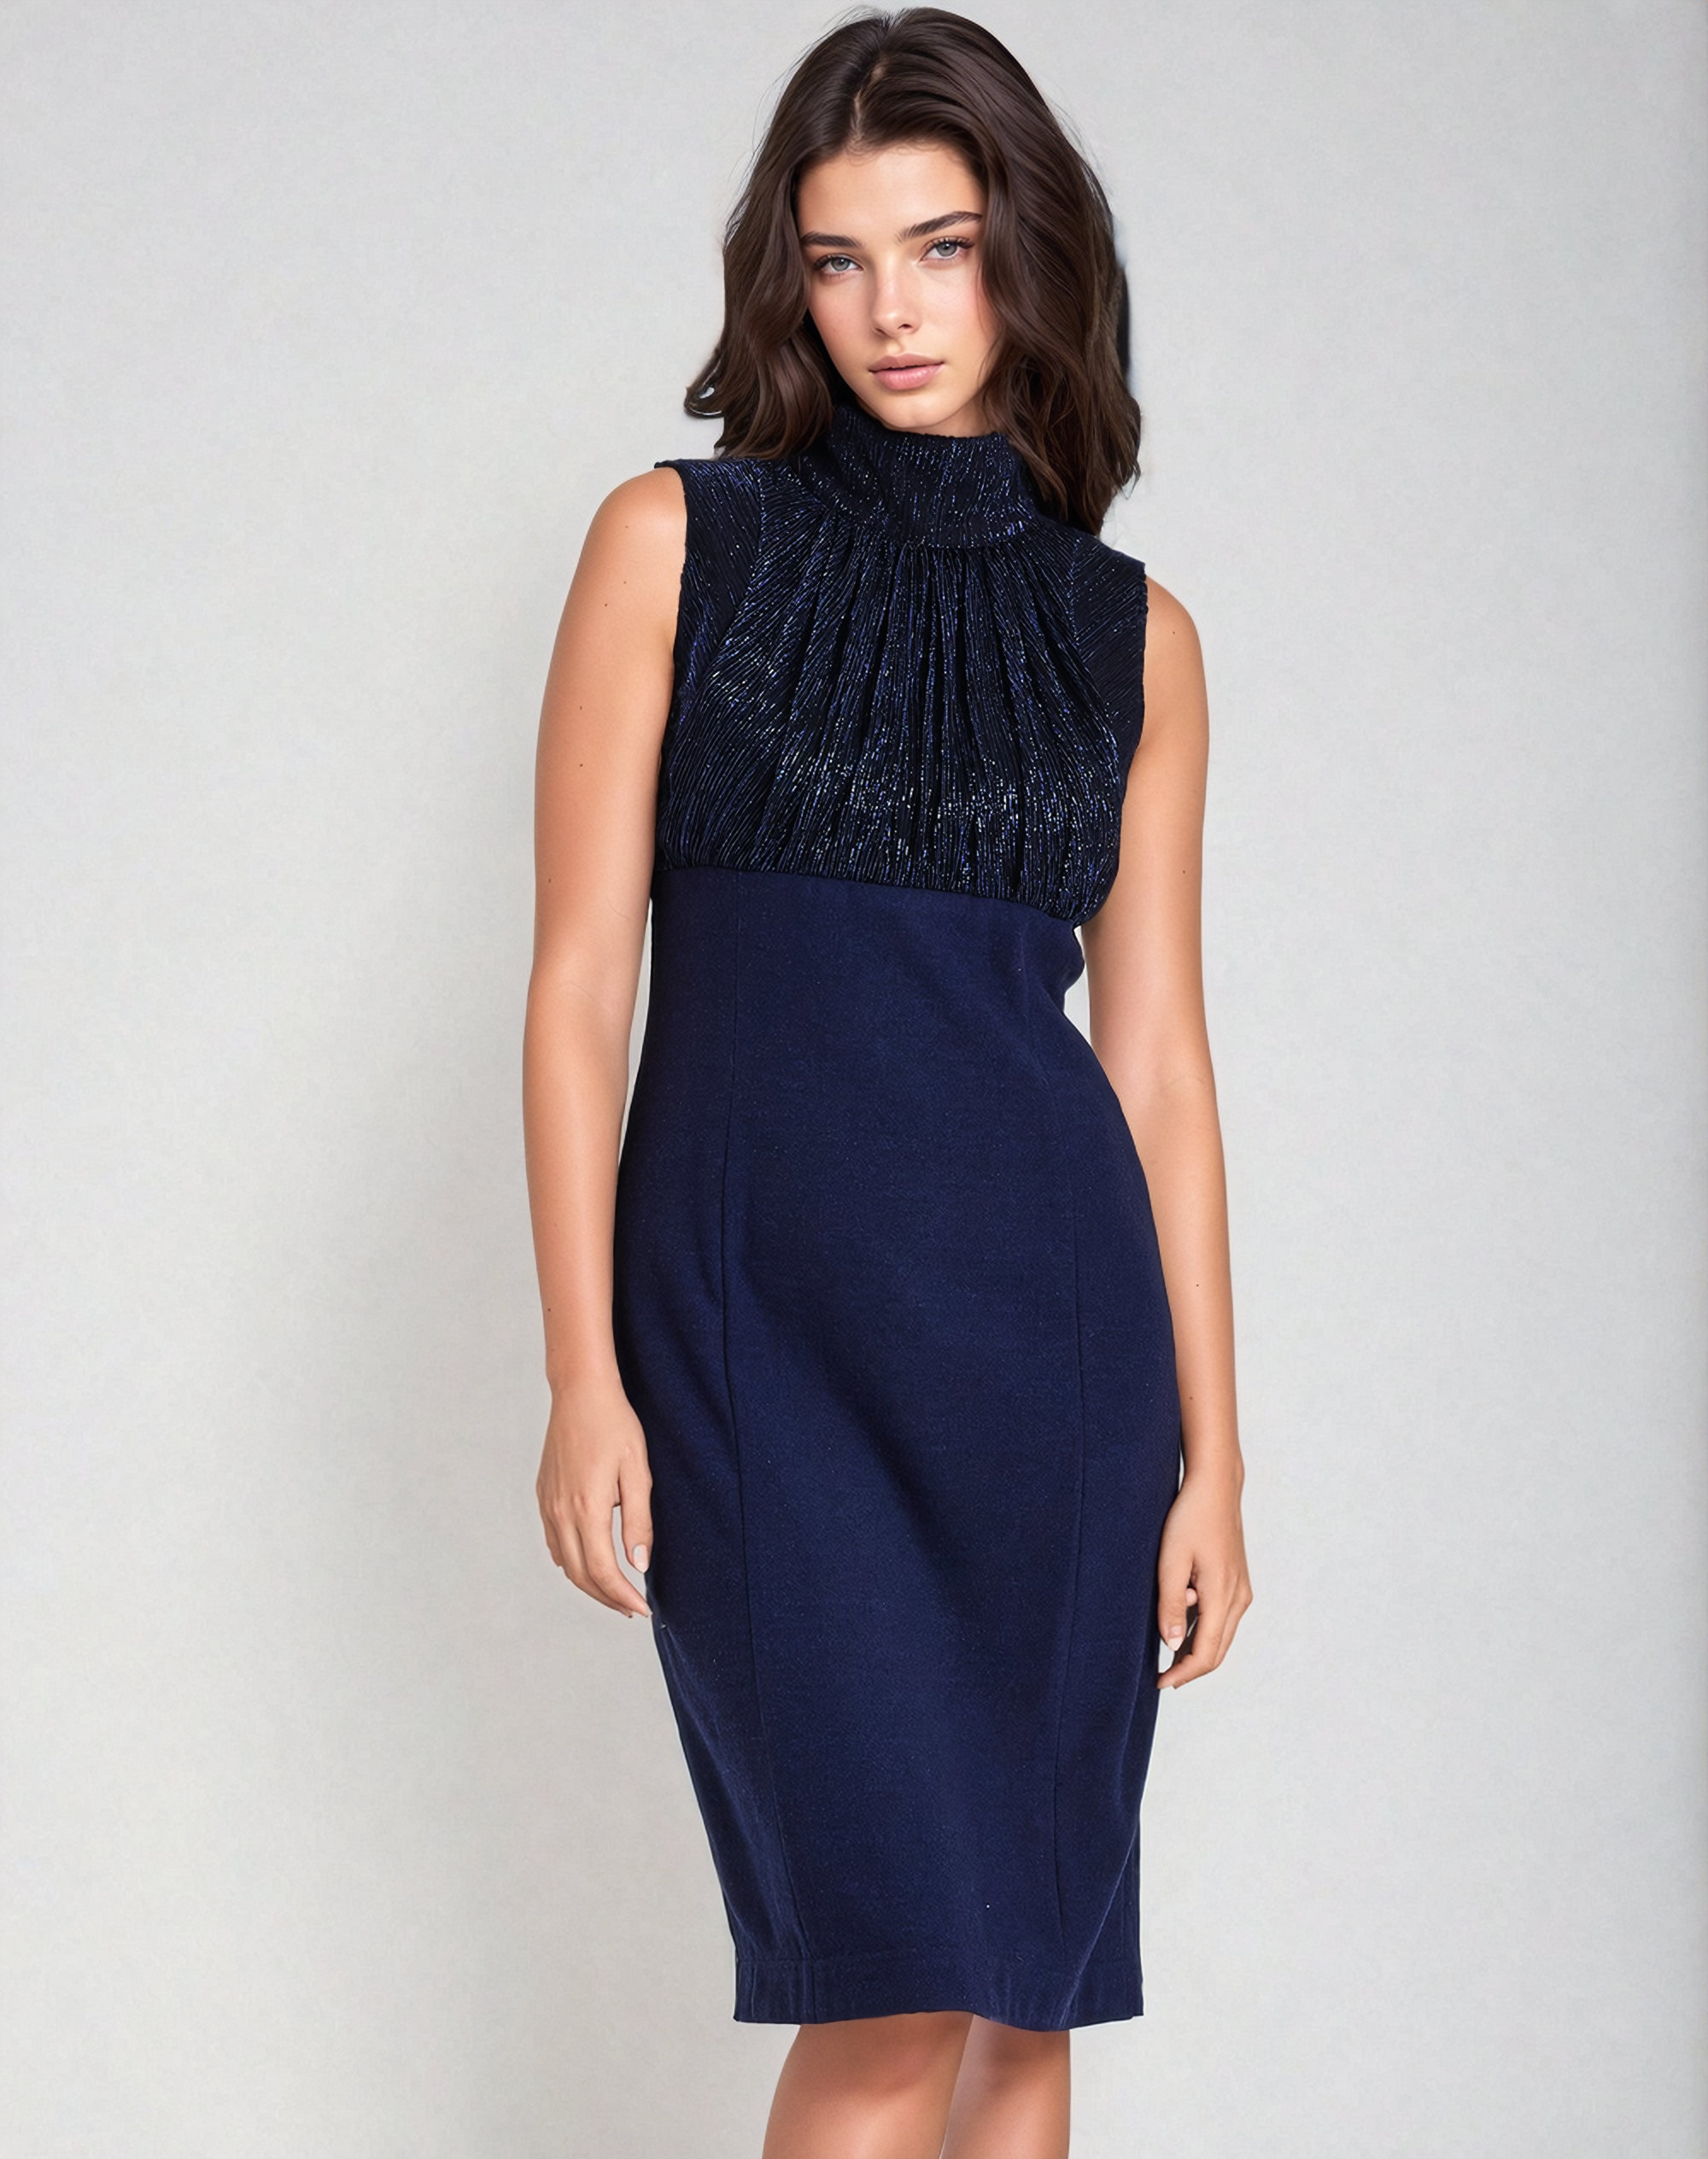 Sleeveless Dress with Fitted Elegance, Voluminous Top, and Alluring Details